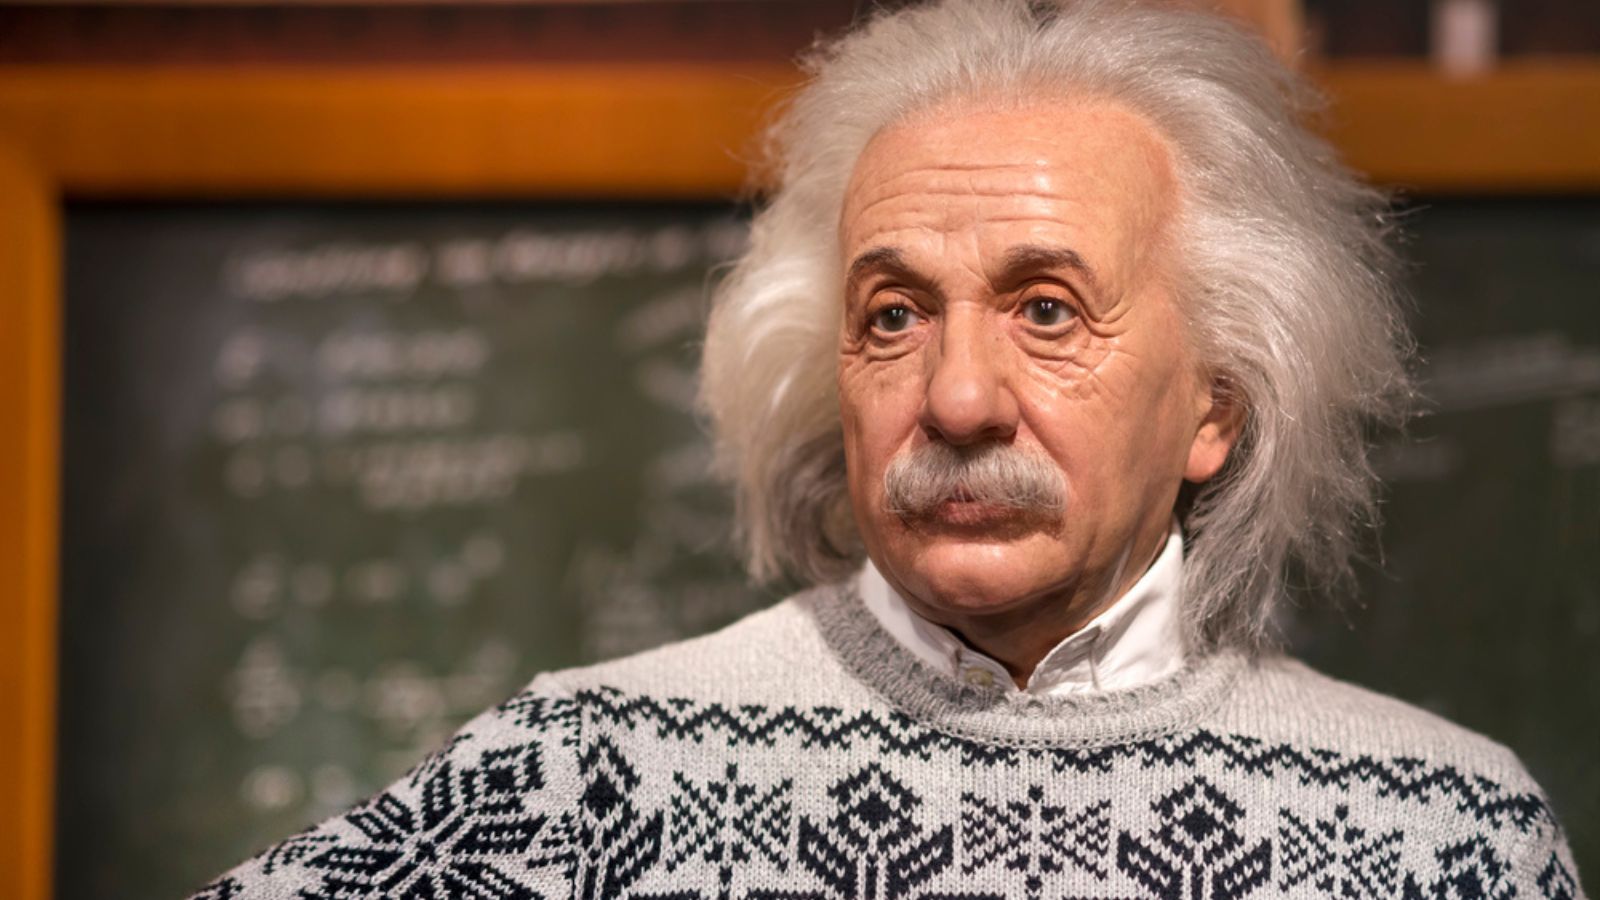 <p>Albert Einstein, the wild-haired genius with a mischievous grin, is more than just a pop culture icon. He’s arguably the most influential scientist of the 20th century, whose theories revolutionized our understanding of the universe and continues to shape our technological world today.</p> <p>Forget that iconic E=mc² equation (which most of us still don’t really understand). Einstein’s legacy extends far beyond chalkboards and dusty textbooks. His groundbreaking work in fields like physics and quantum mechanics has led to advancements in everything from nuclear energy to GPS navigation.</p> <p>Let’s dive into the mind of a genius and discover 12 ways Einstein’s work has impacted our world. Prepare to have your mind blown!</p>